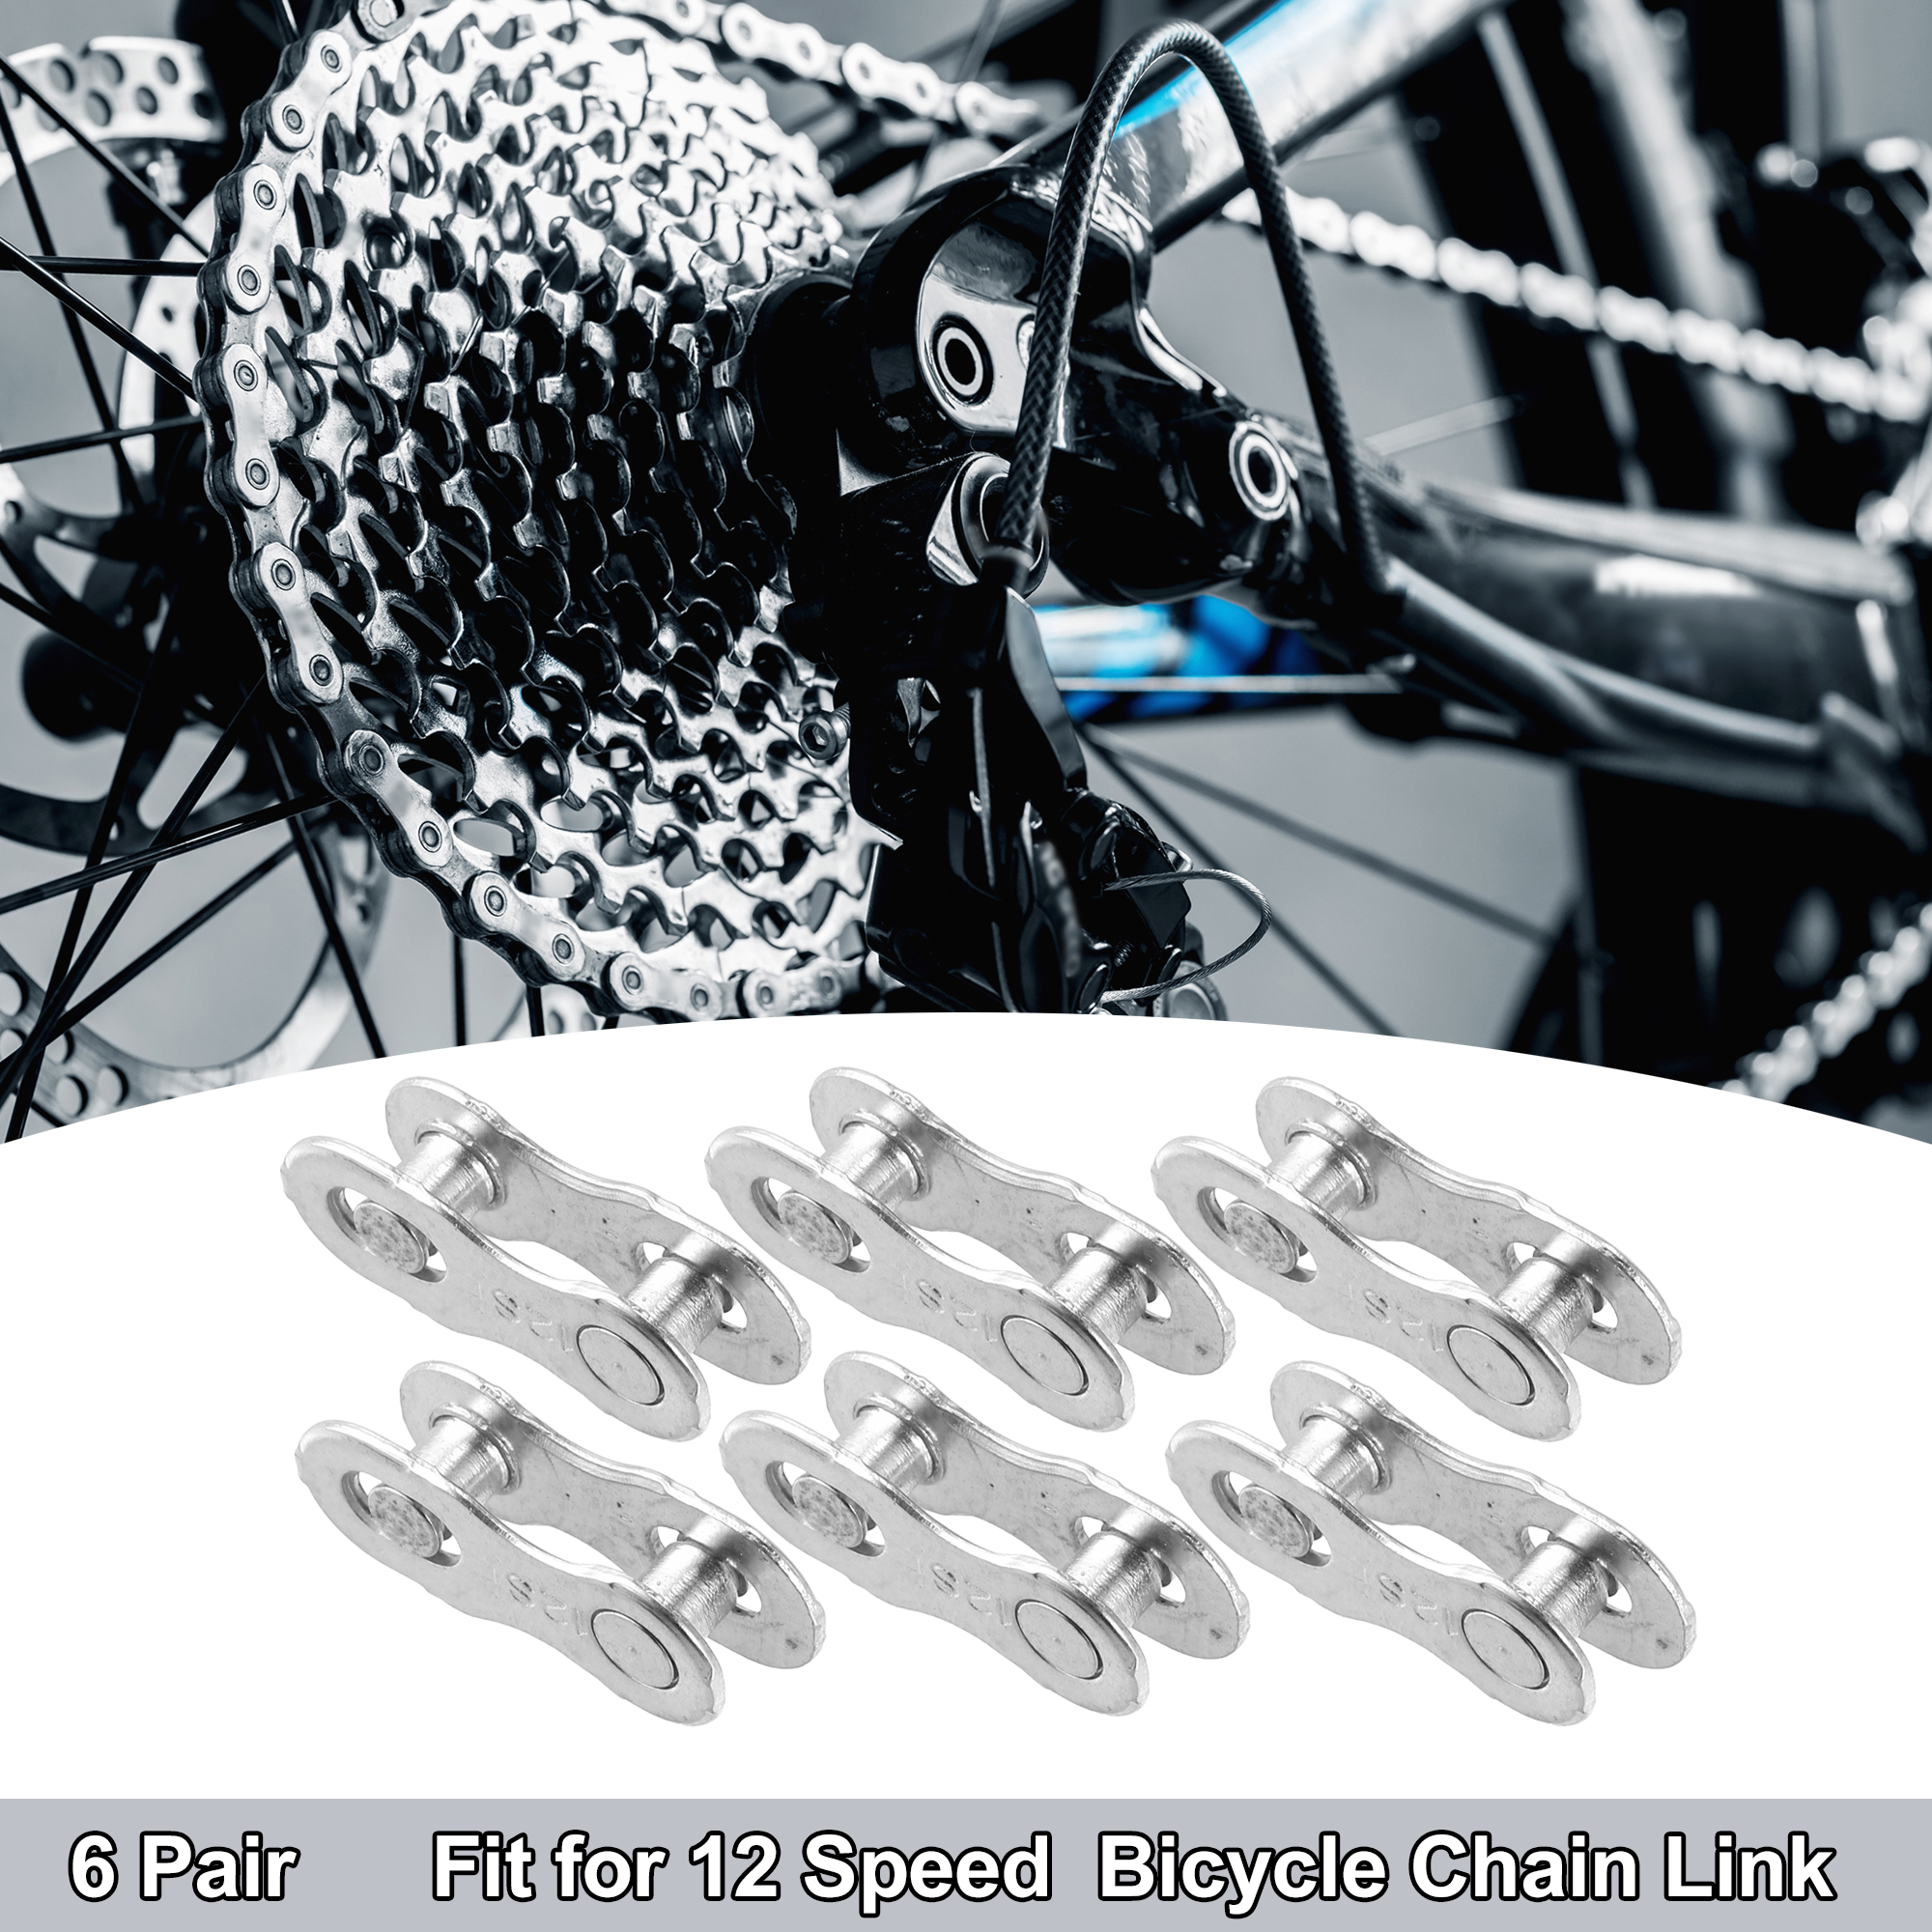 Unique Bargains 6 Pair 12 Speed Silver Tone Chain Master Link Connectors for Bike Bicycle MTB